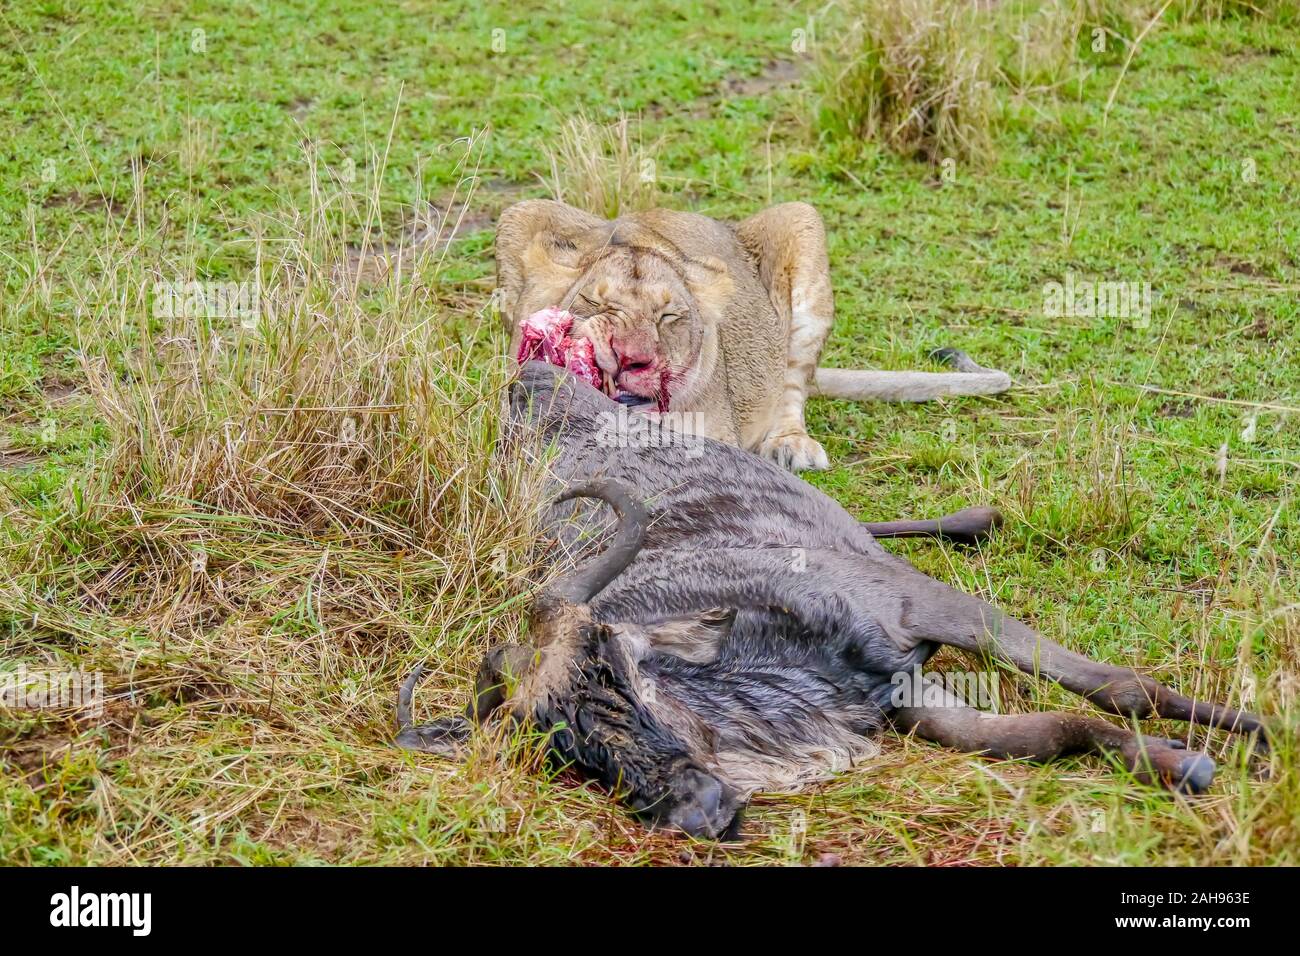 An African safari scene showing an adult lioness chewing the flesh of a wildebeest she has just killed during the annual great migration in the Masai. Stock Photo